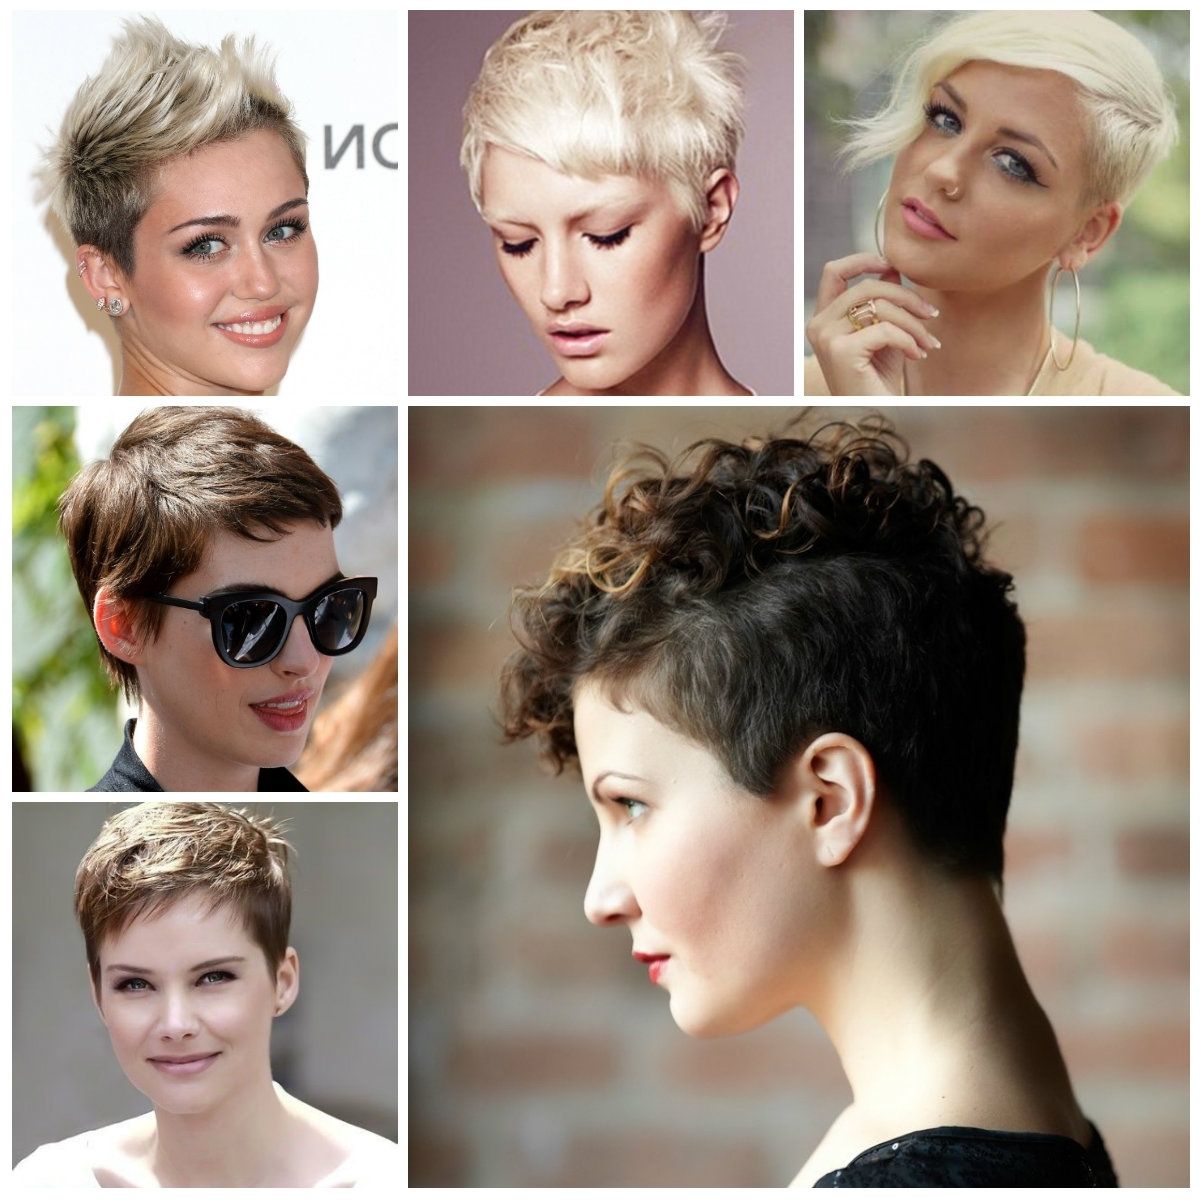 10 Trendy Pixie Haircuts For 2016 | Haircuts, Hairstyles 2017 And Regarding Recent Stylish Pixie Hairstyles (View 2 of 15)